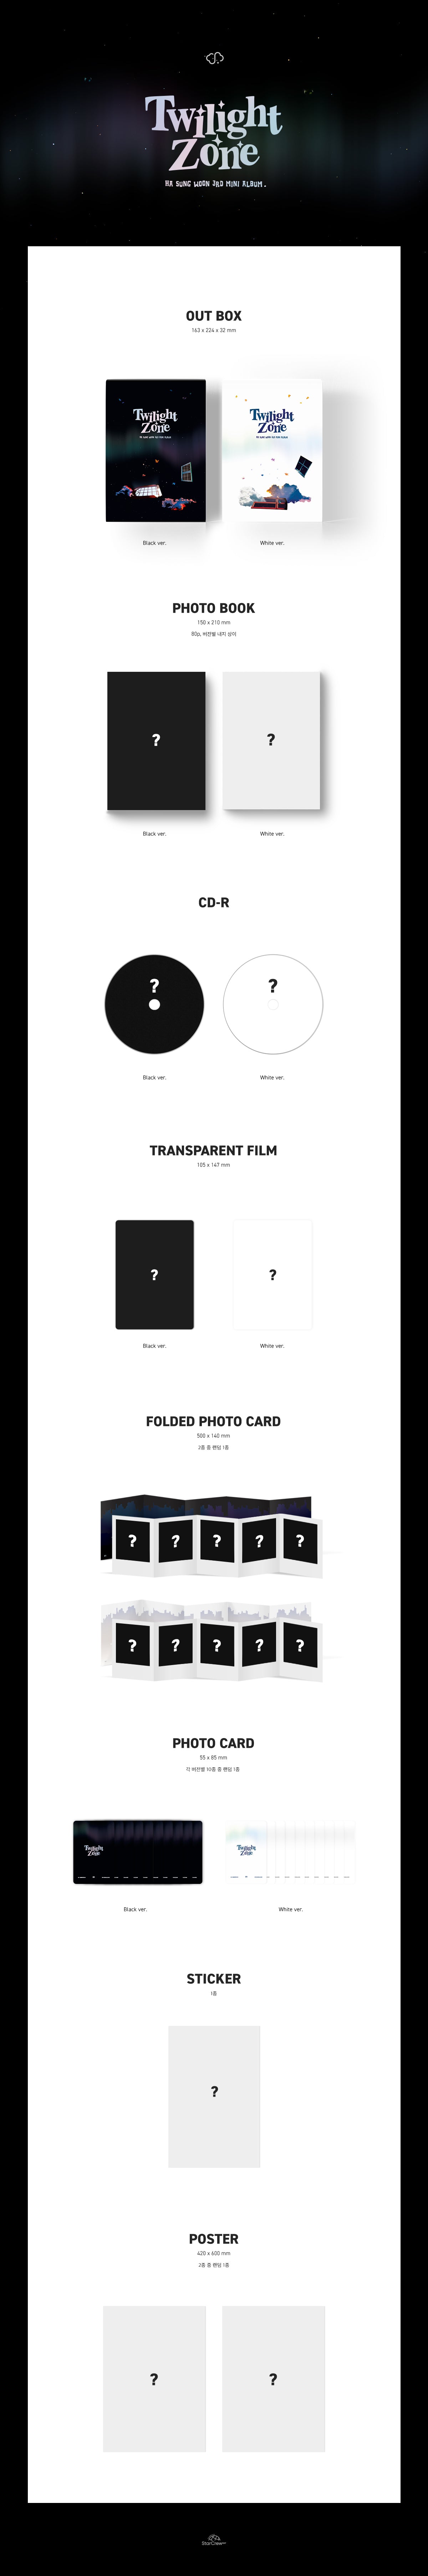 1 CD
1 Photo Book (80 pages)
1 Transparent Film
1 Folded Photo Card
1 Photo Card
1 Sticker